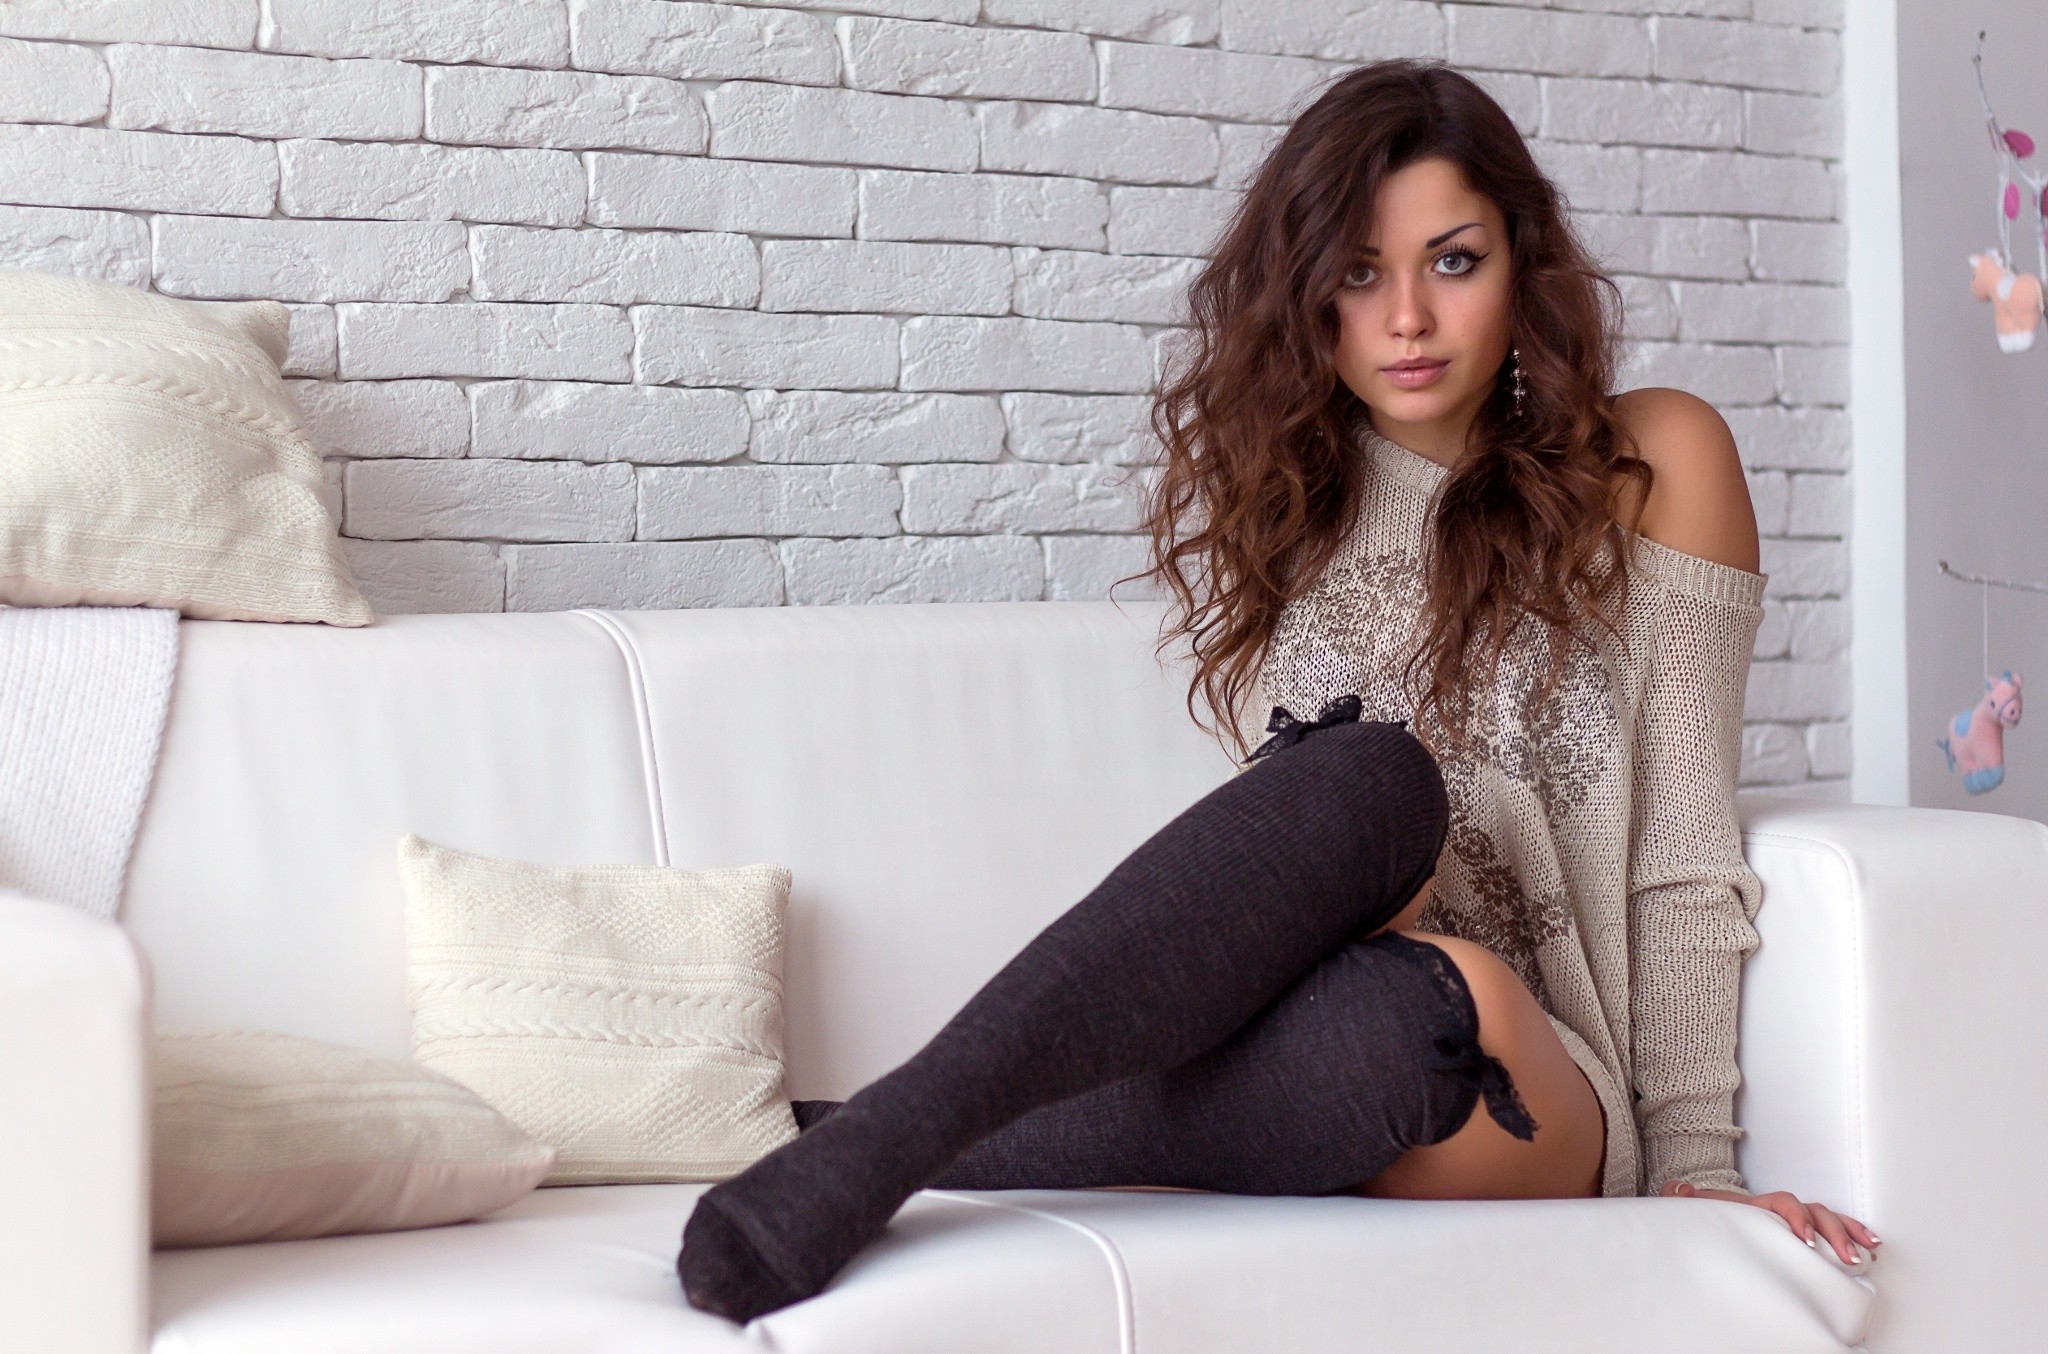 People 2048x1354 women long hair knee-highs sitting brunette long eyelashes couch looking at viewer knit fabric